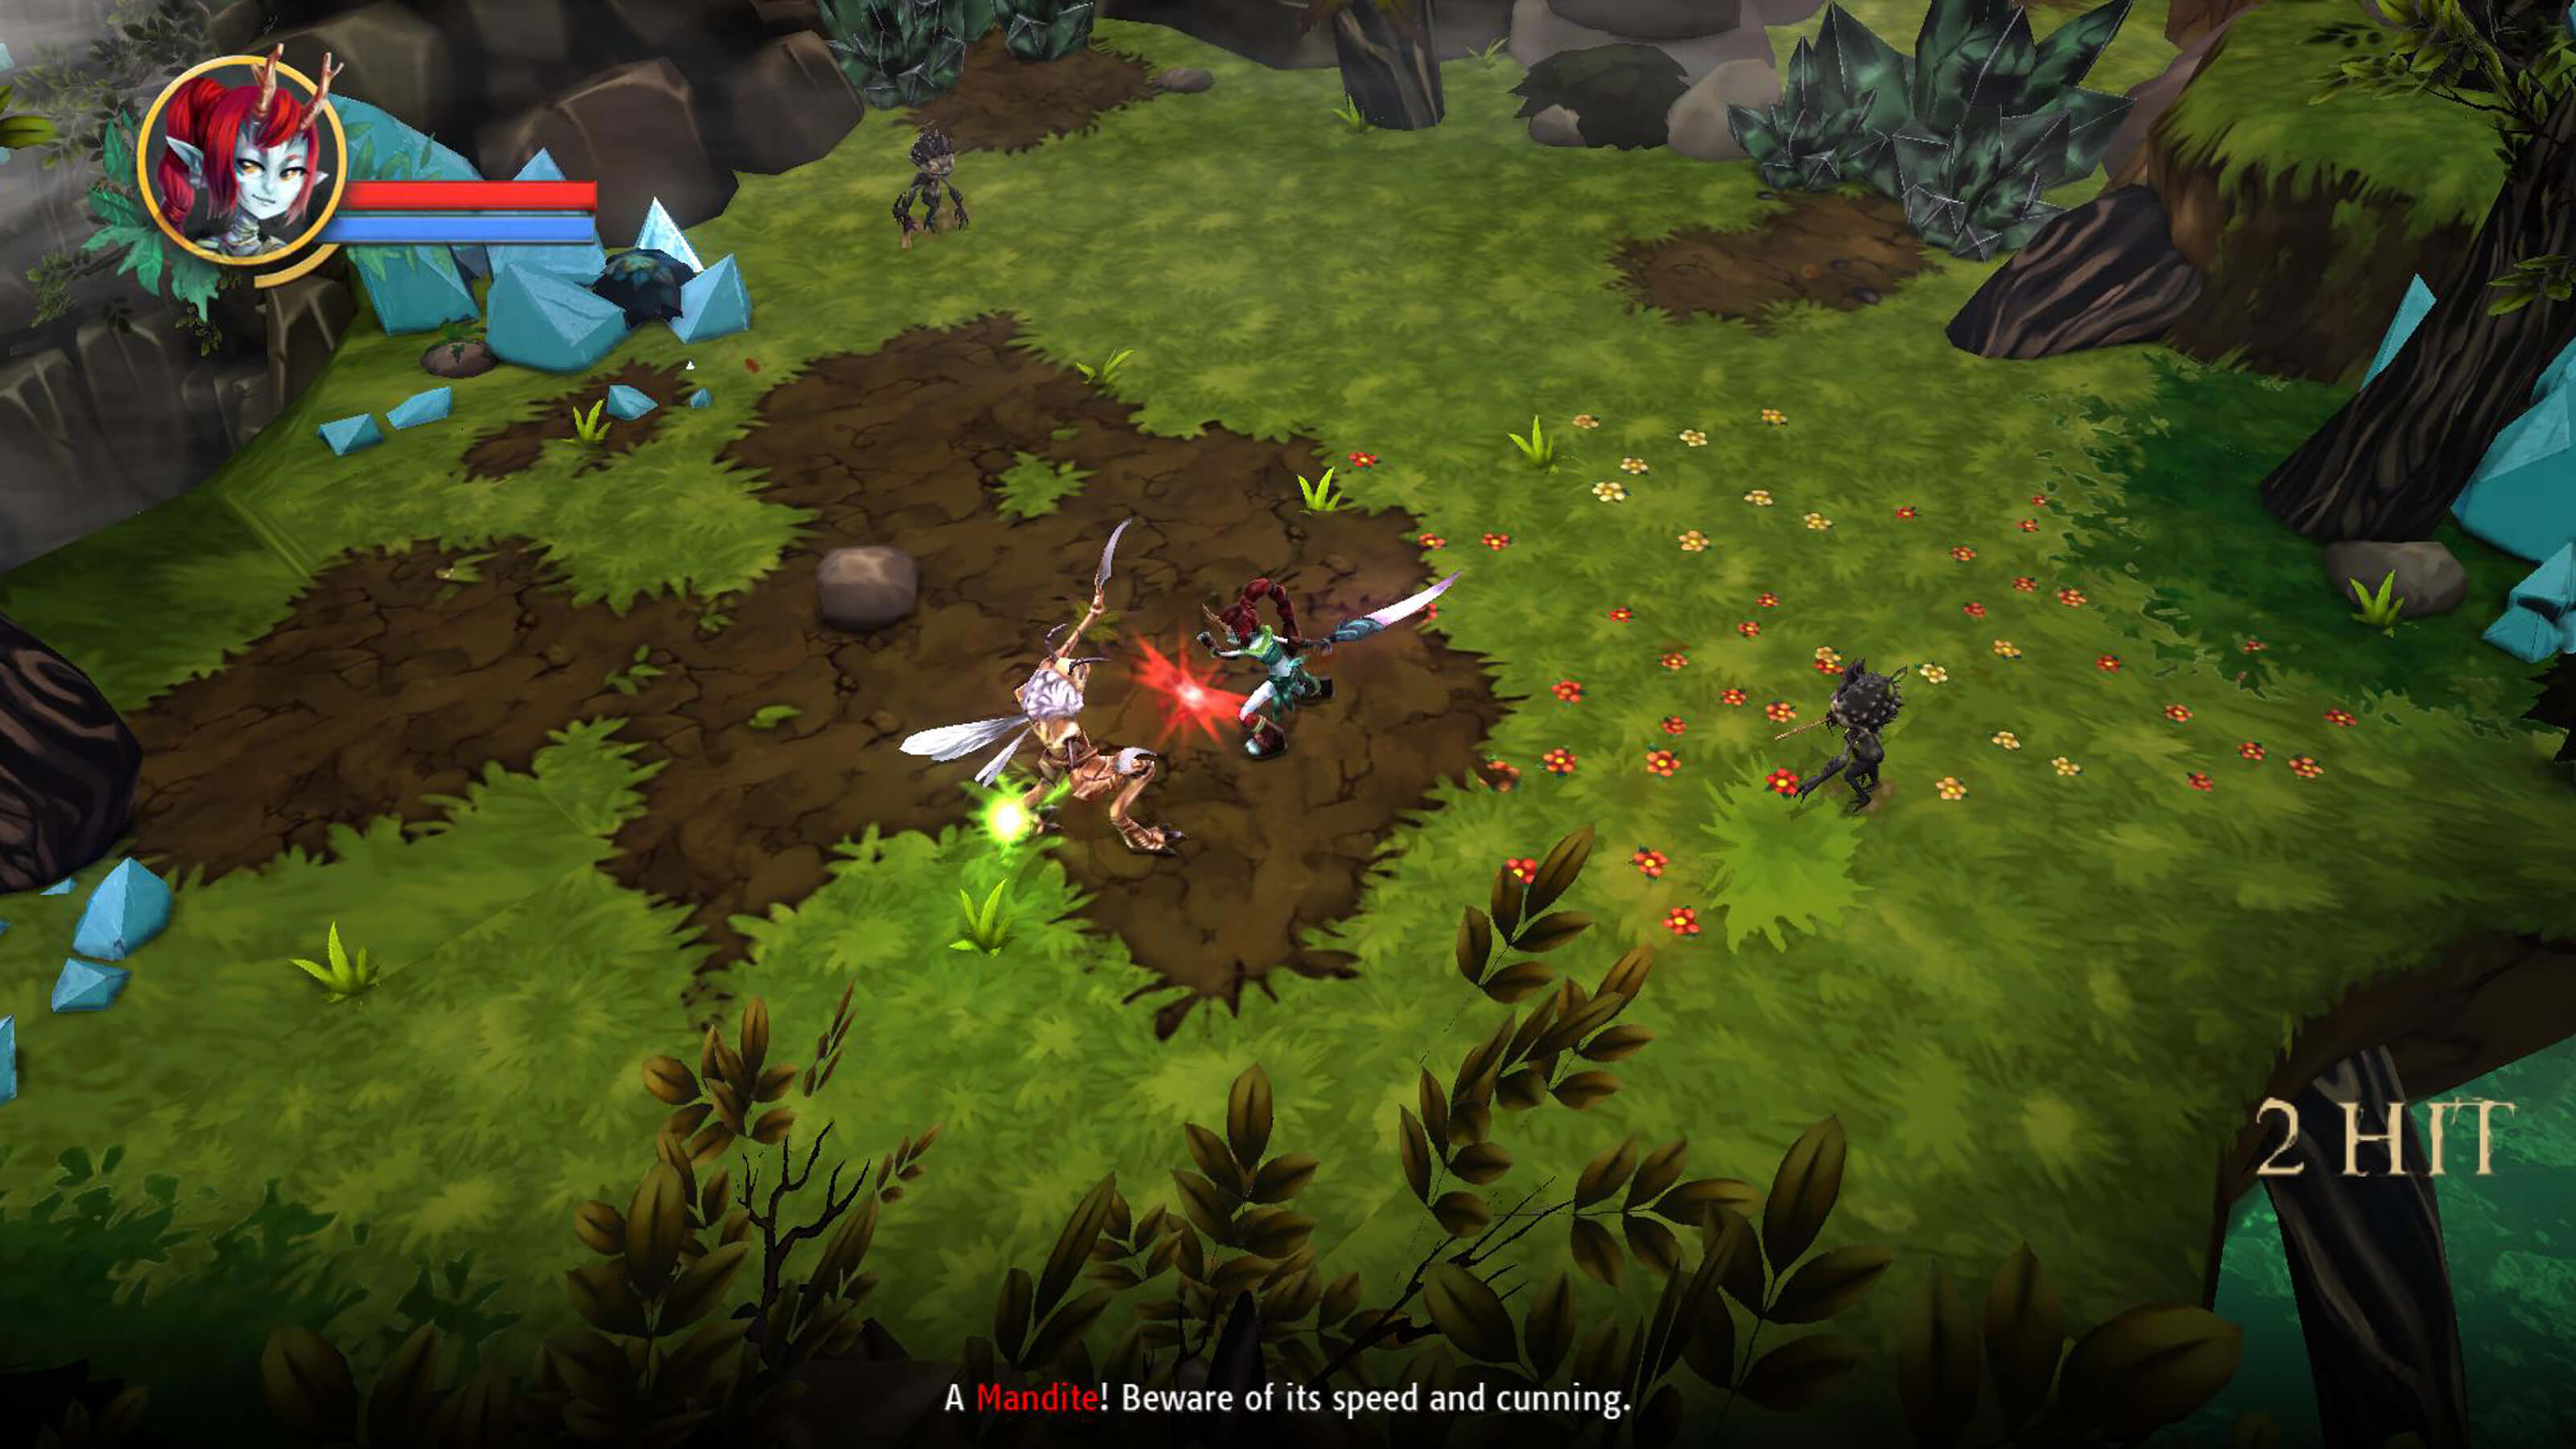 The player's character swings her sword while dueling a large, bipedal insectoid enemy